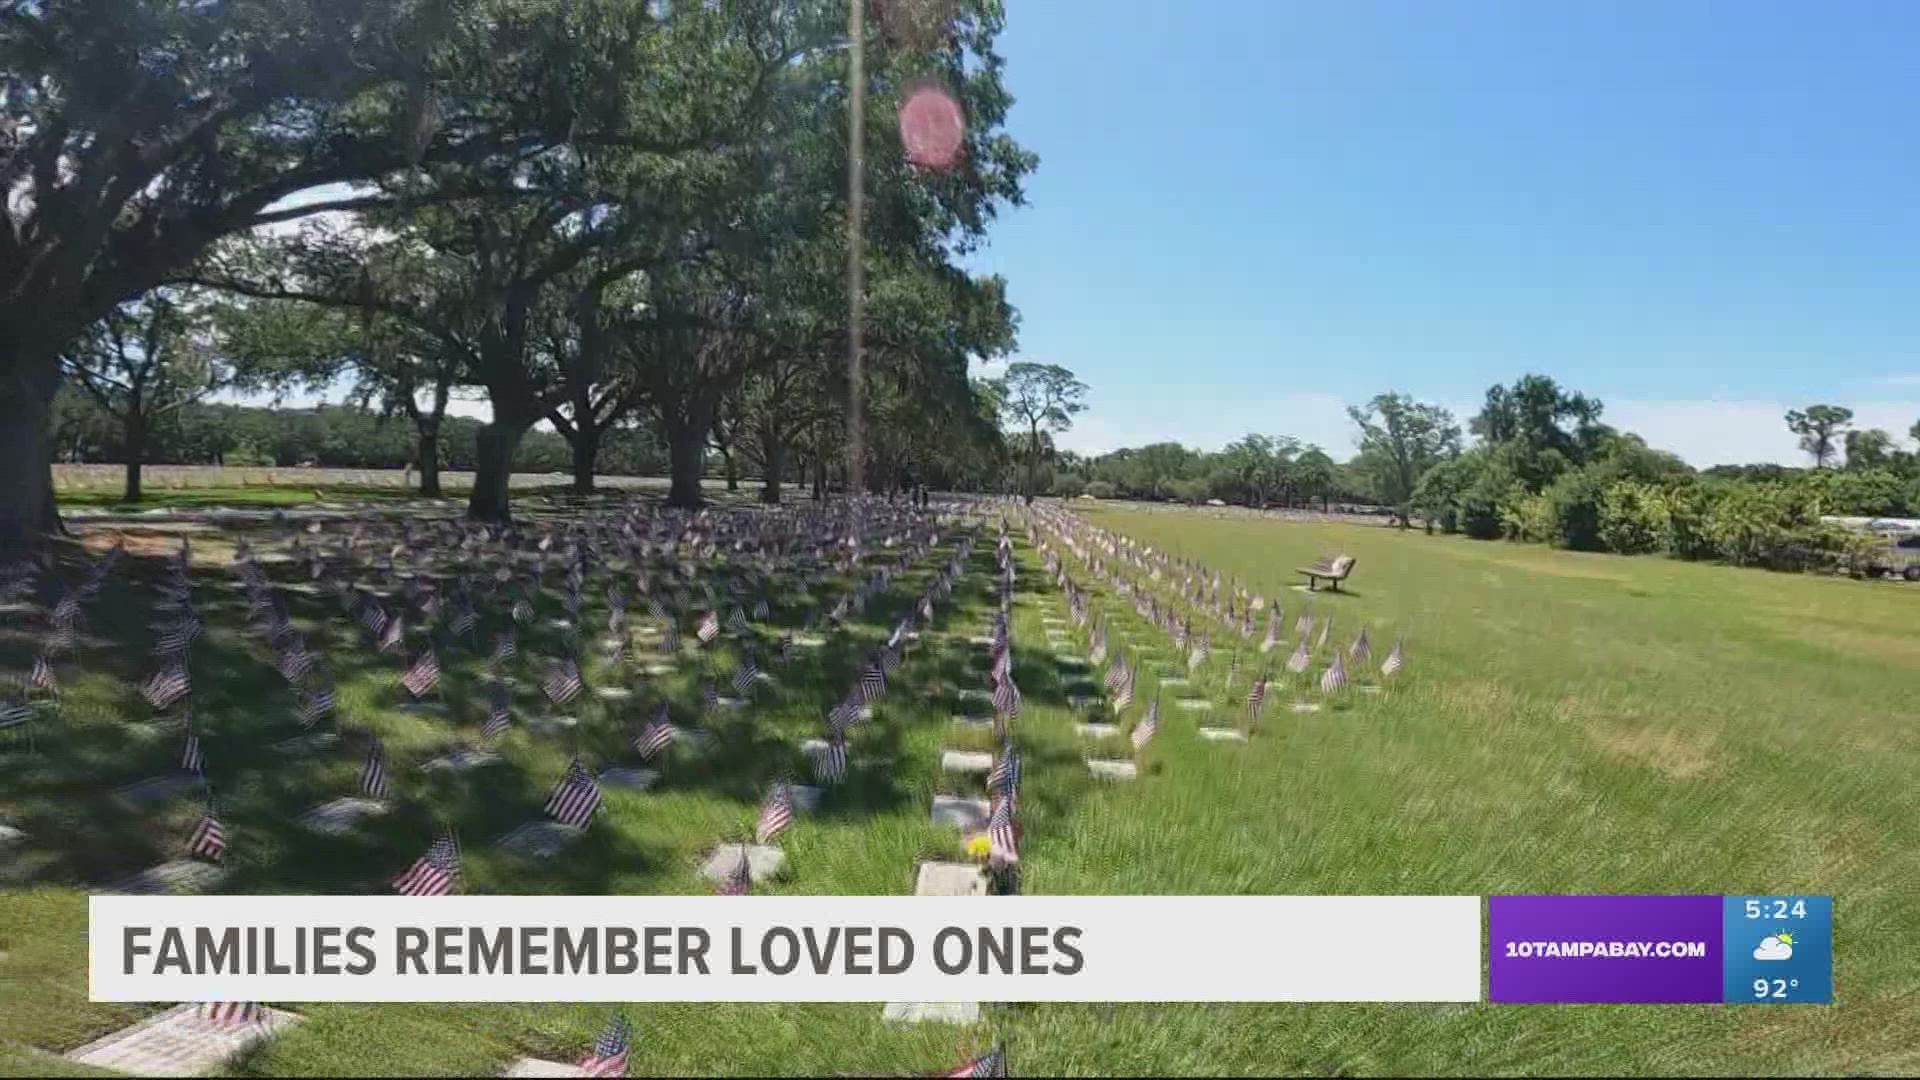 Families remembered loved ones at Bay Pines National Cemetery this